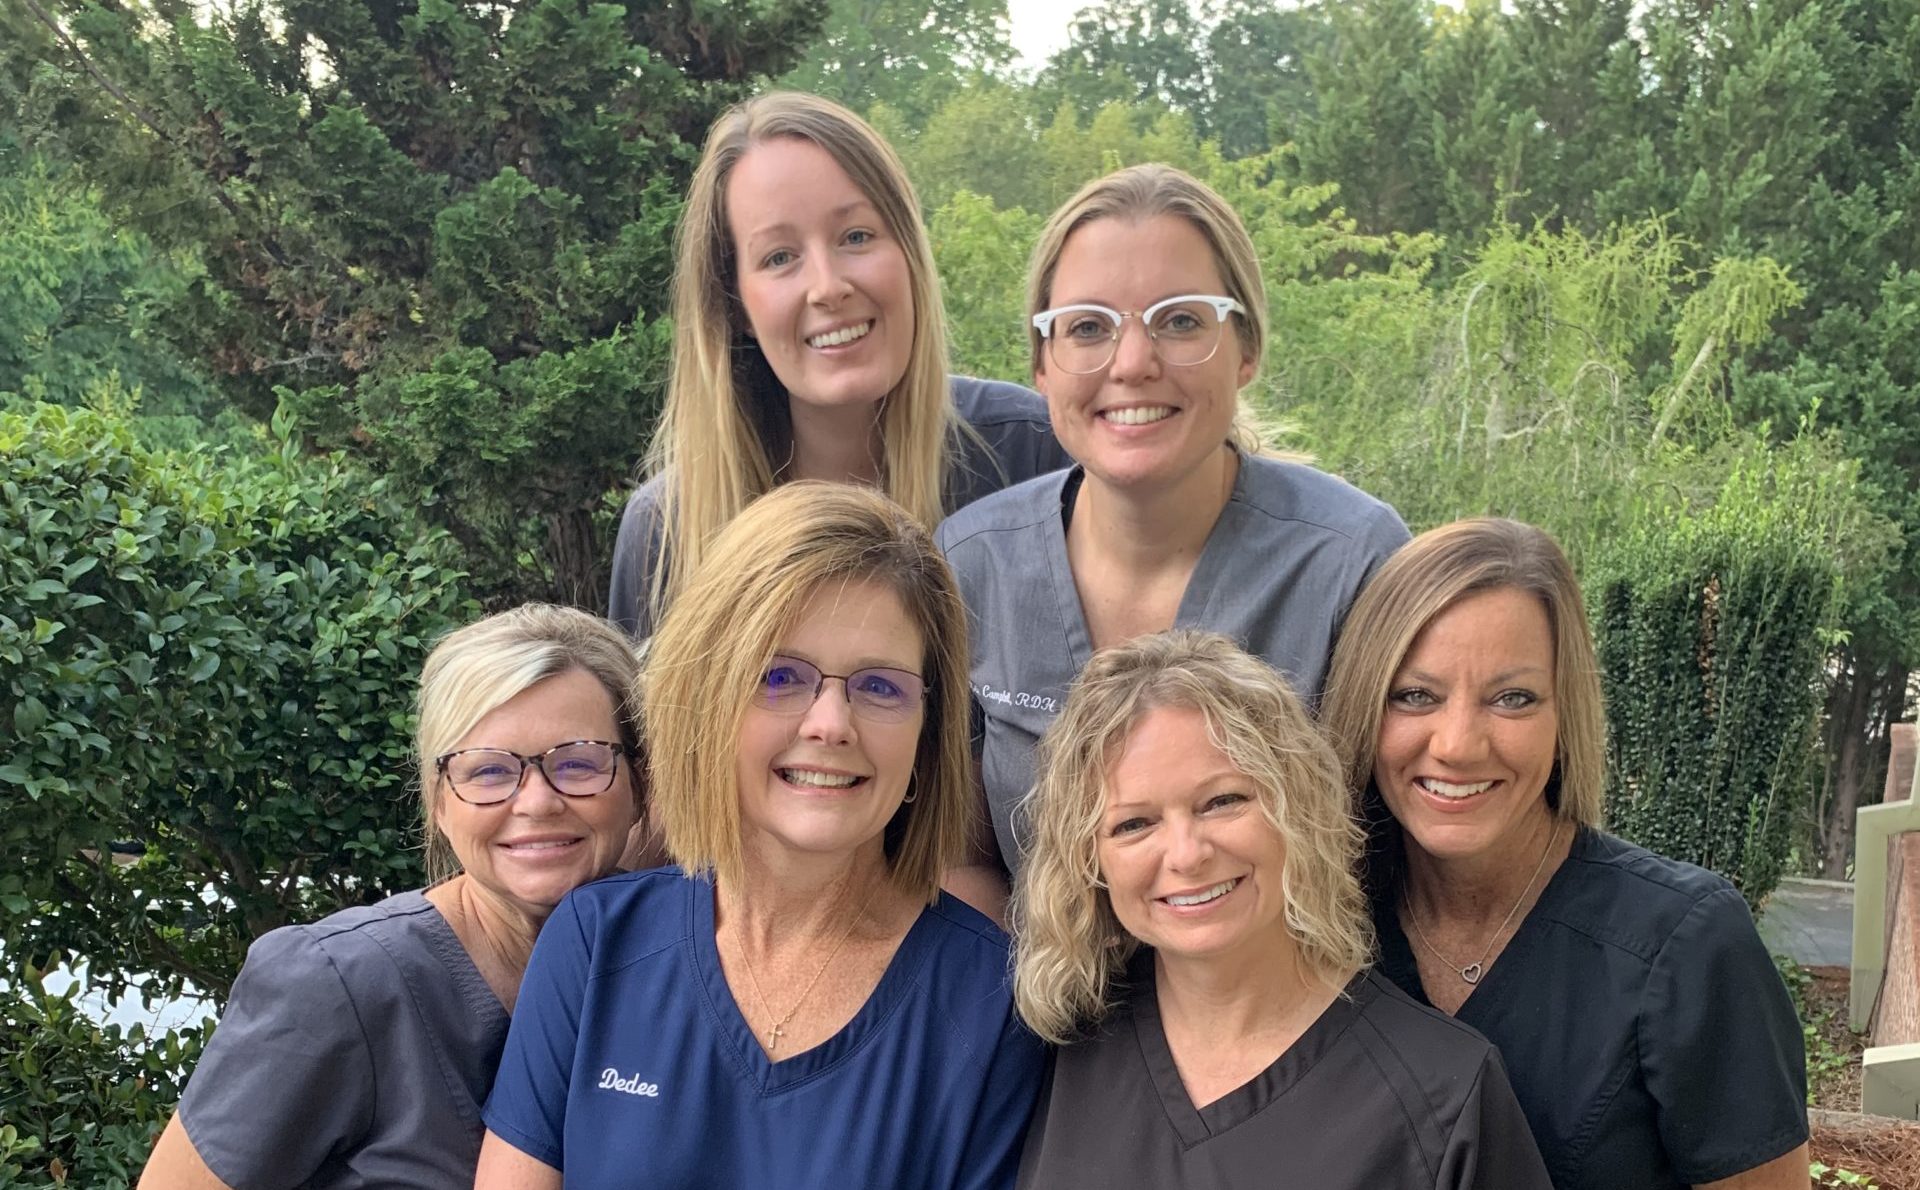 Cleveland Park Staff posing together on a porch at Rocky Creek Dental Care in Greeneville, SC